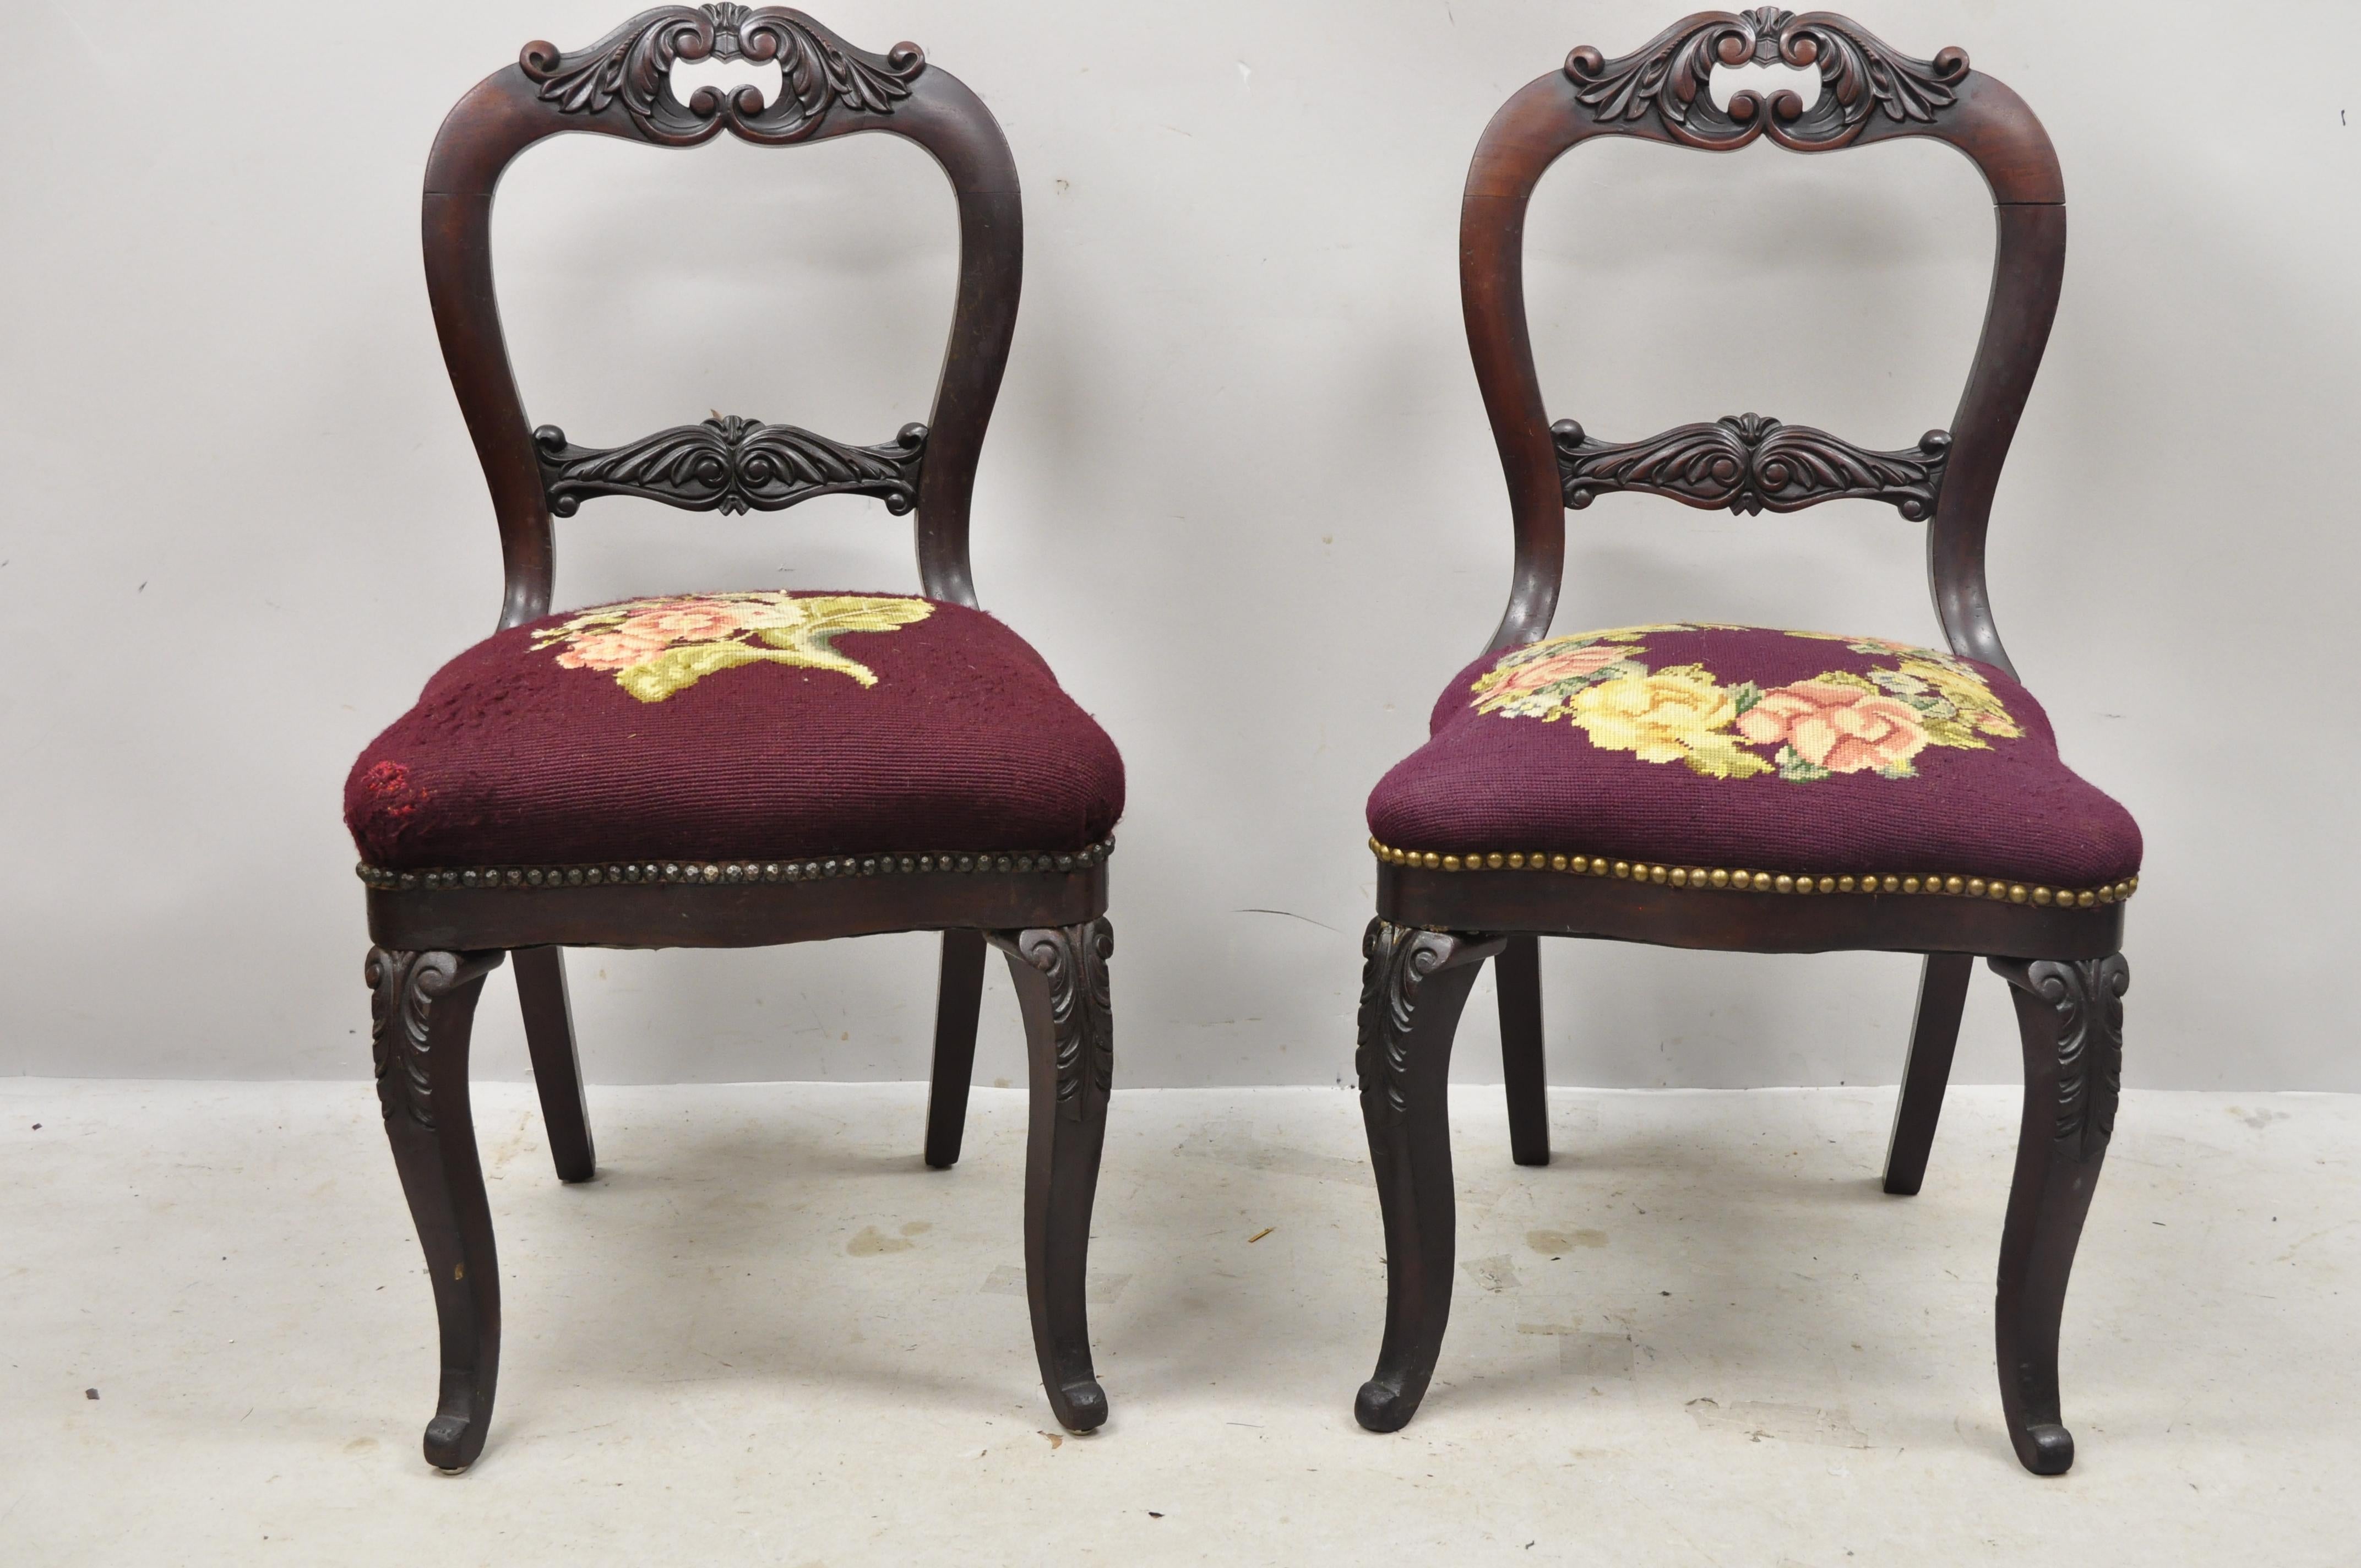 Antique American Eastlake Victorian carved mahogany floral needlepoint side chairs - a pair. Item features floral needlepoint upholstery, solid wood frame, nicely carved details, very nice antique pair, circa late 19th century. Measurements: 34